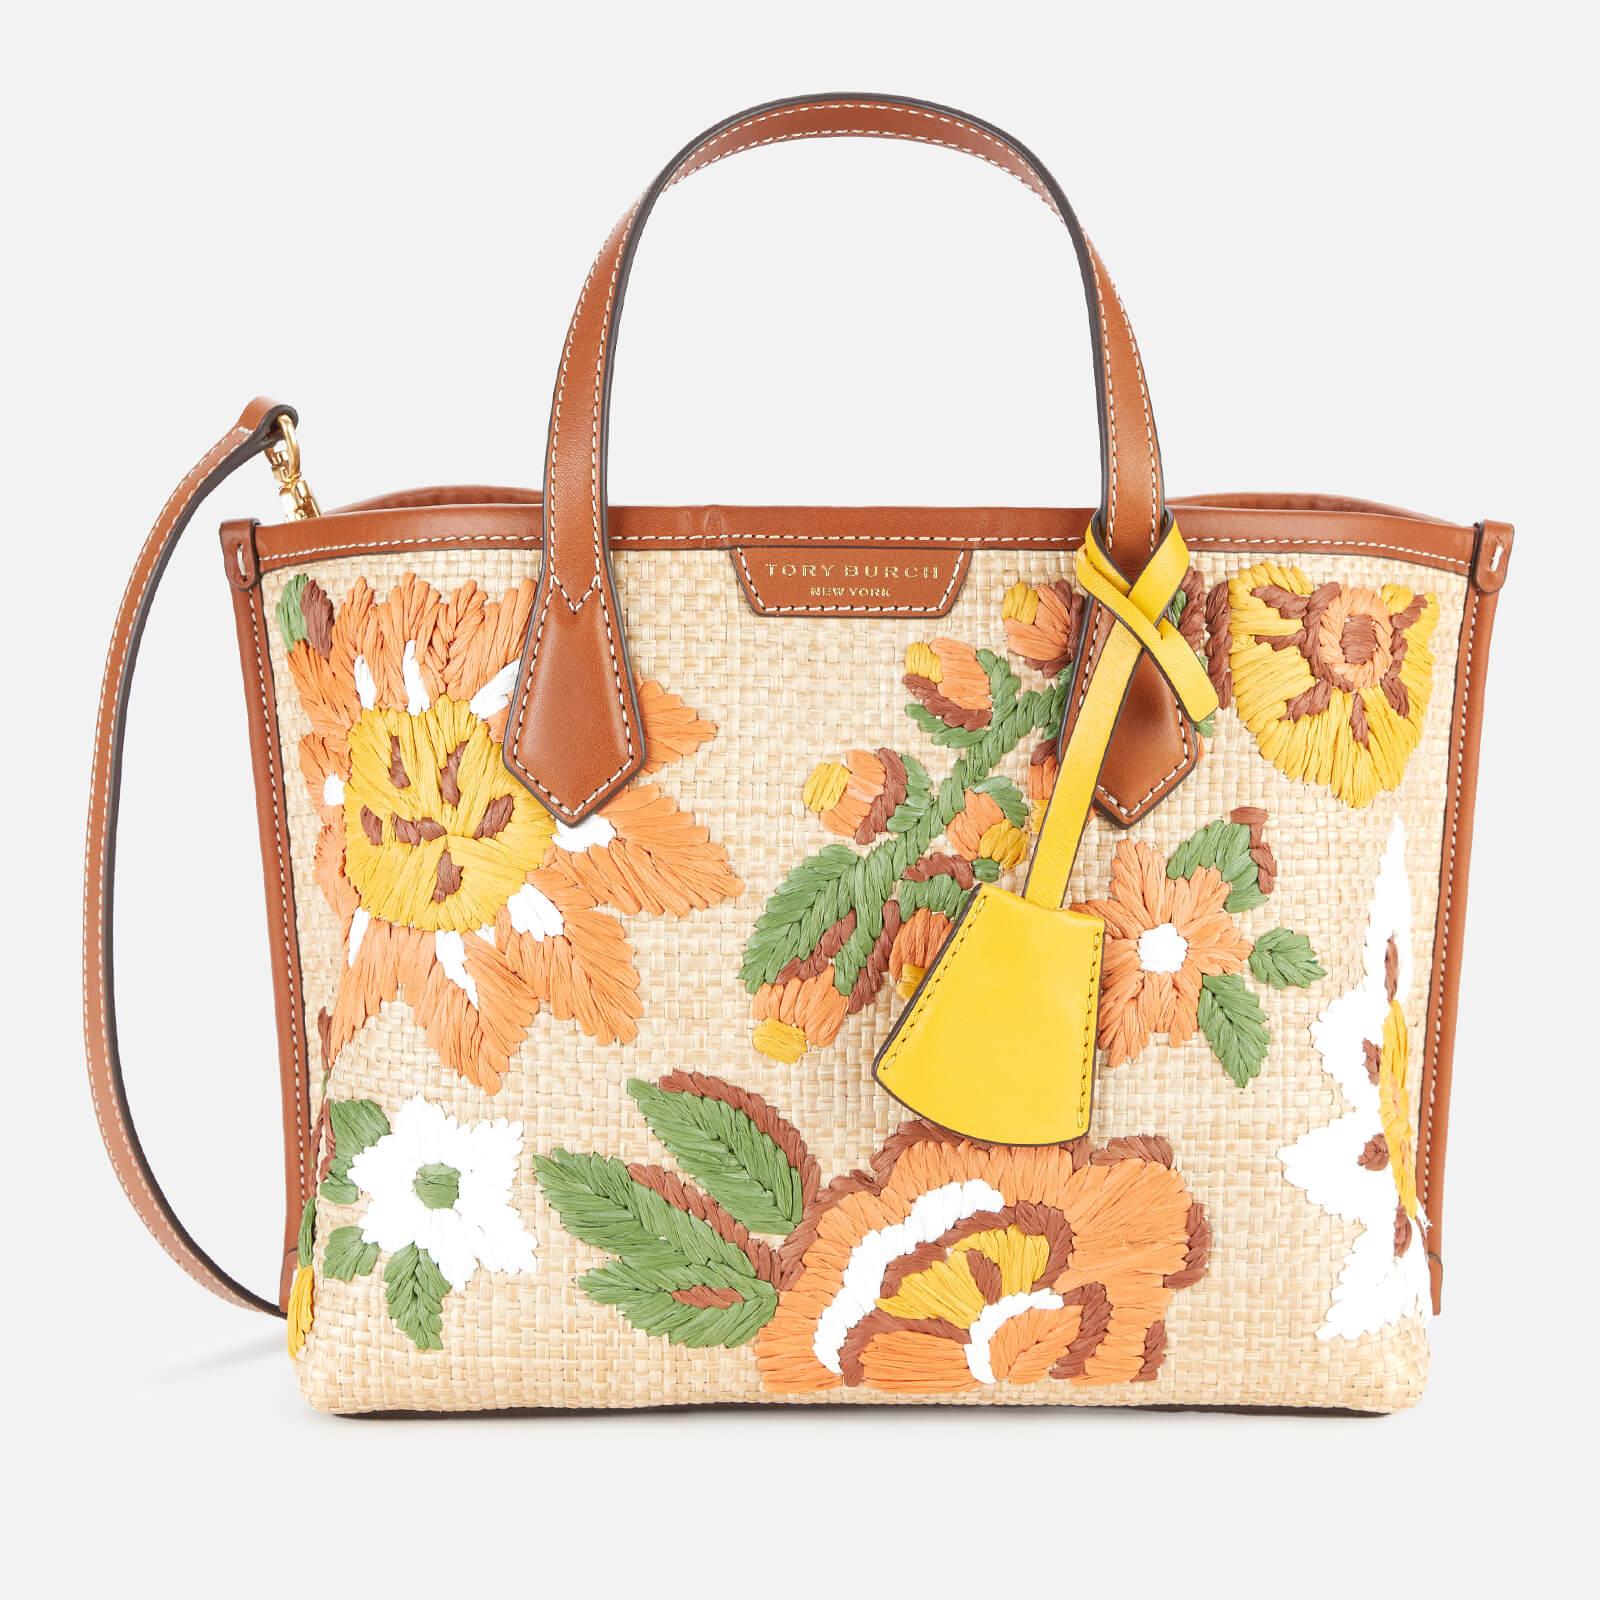 Tory Burch Perry Straw Embroidered Tote Bag in Brown | Lyst